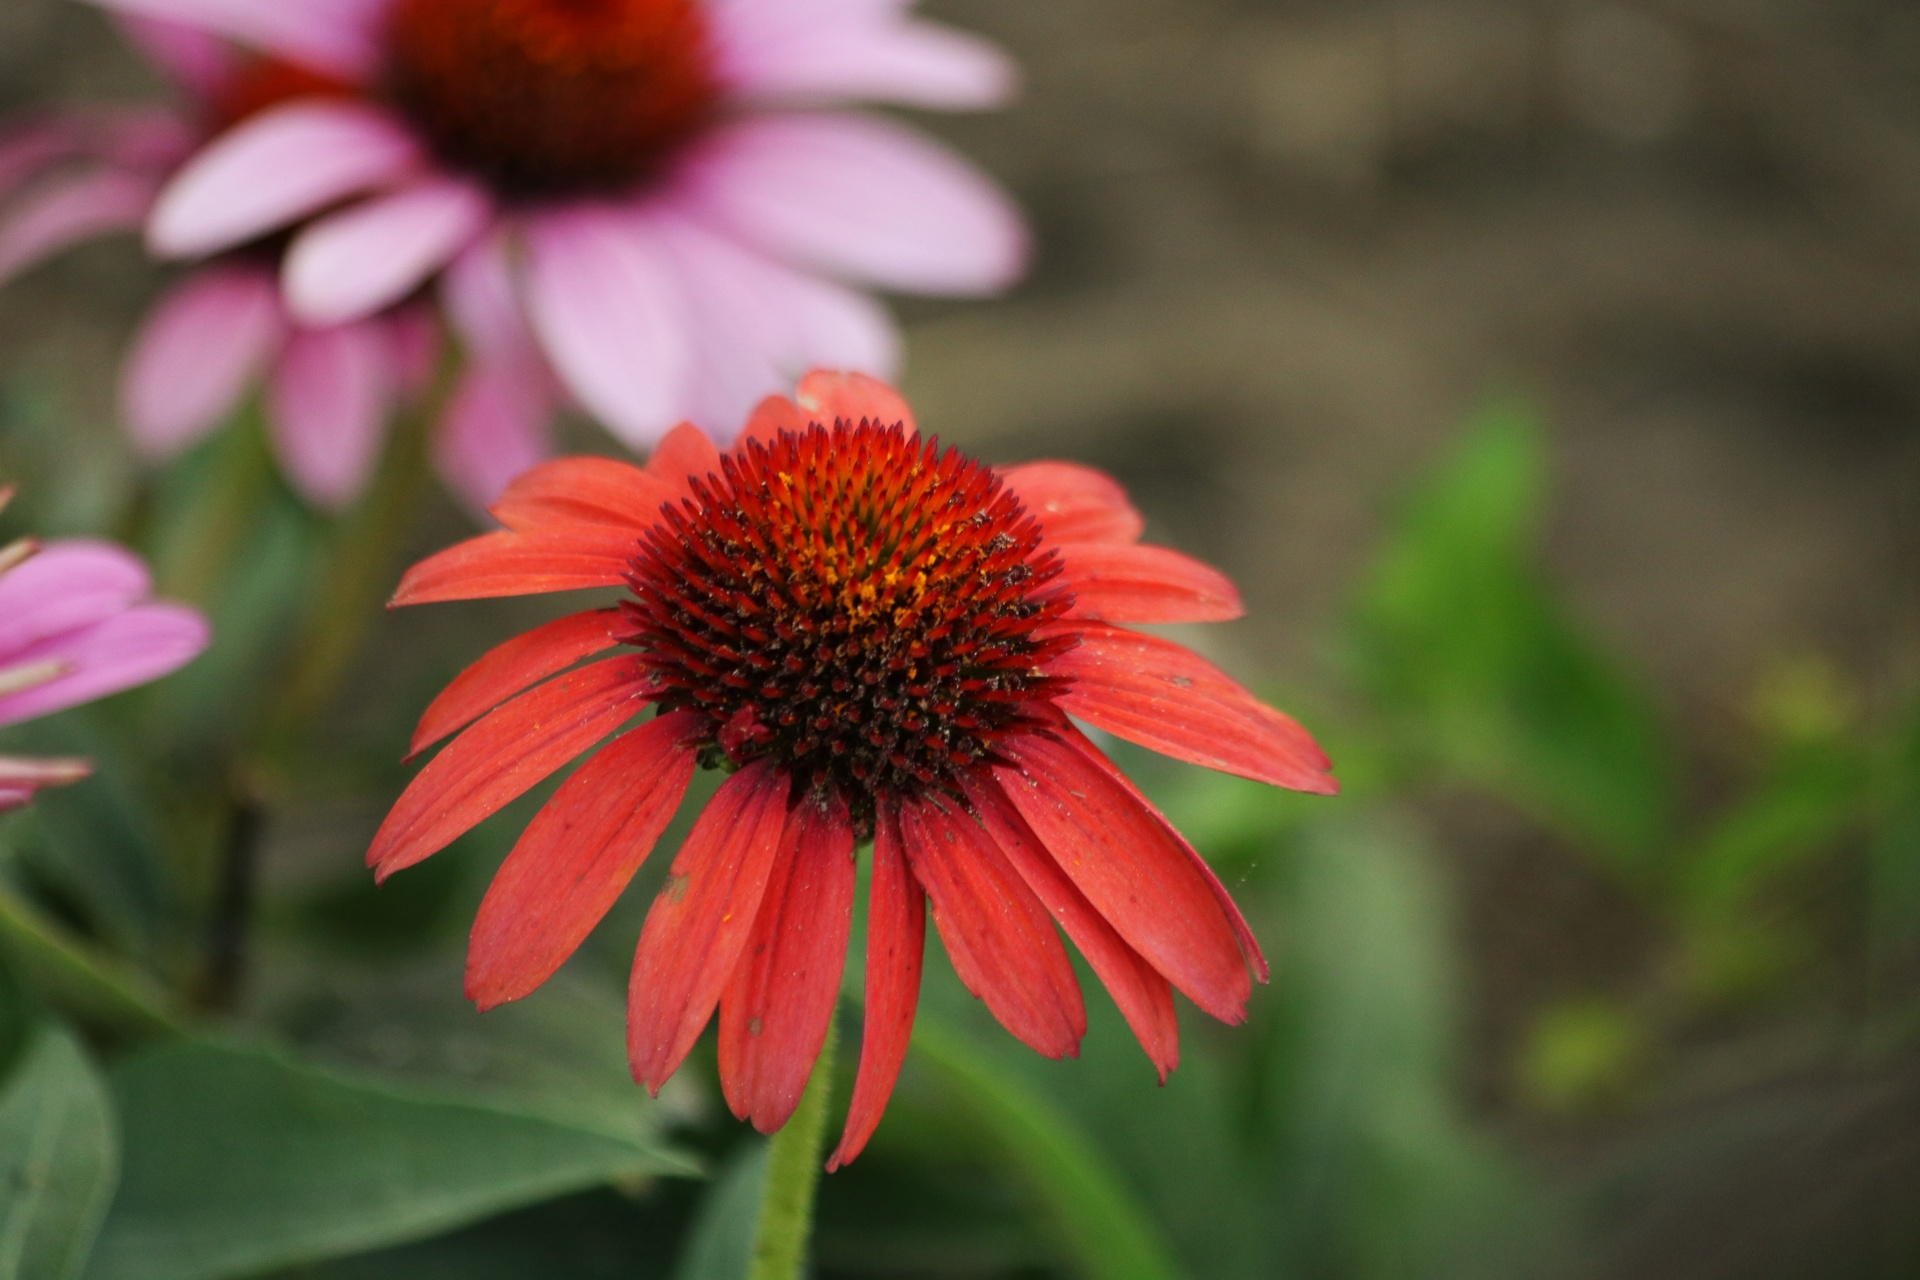 A beautiful dark orange coneflower with pink coneflowers blurred in the background, on a blurred green background.